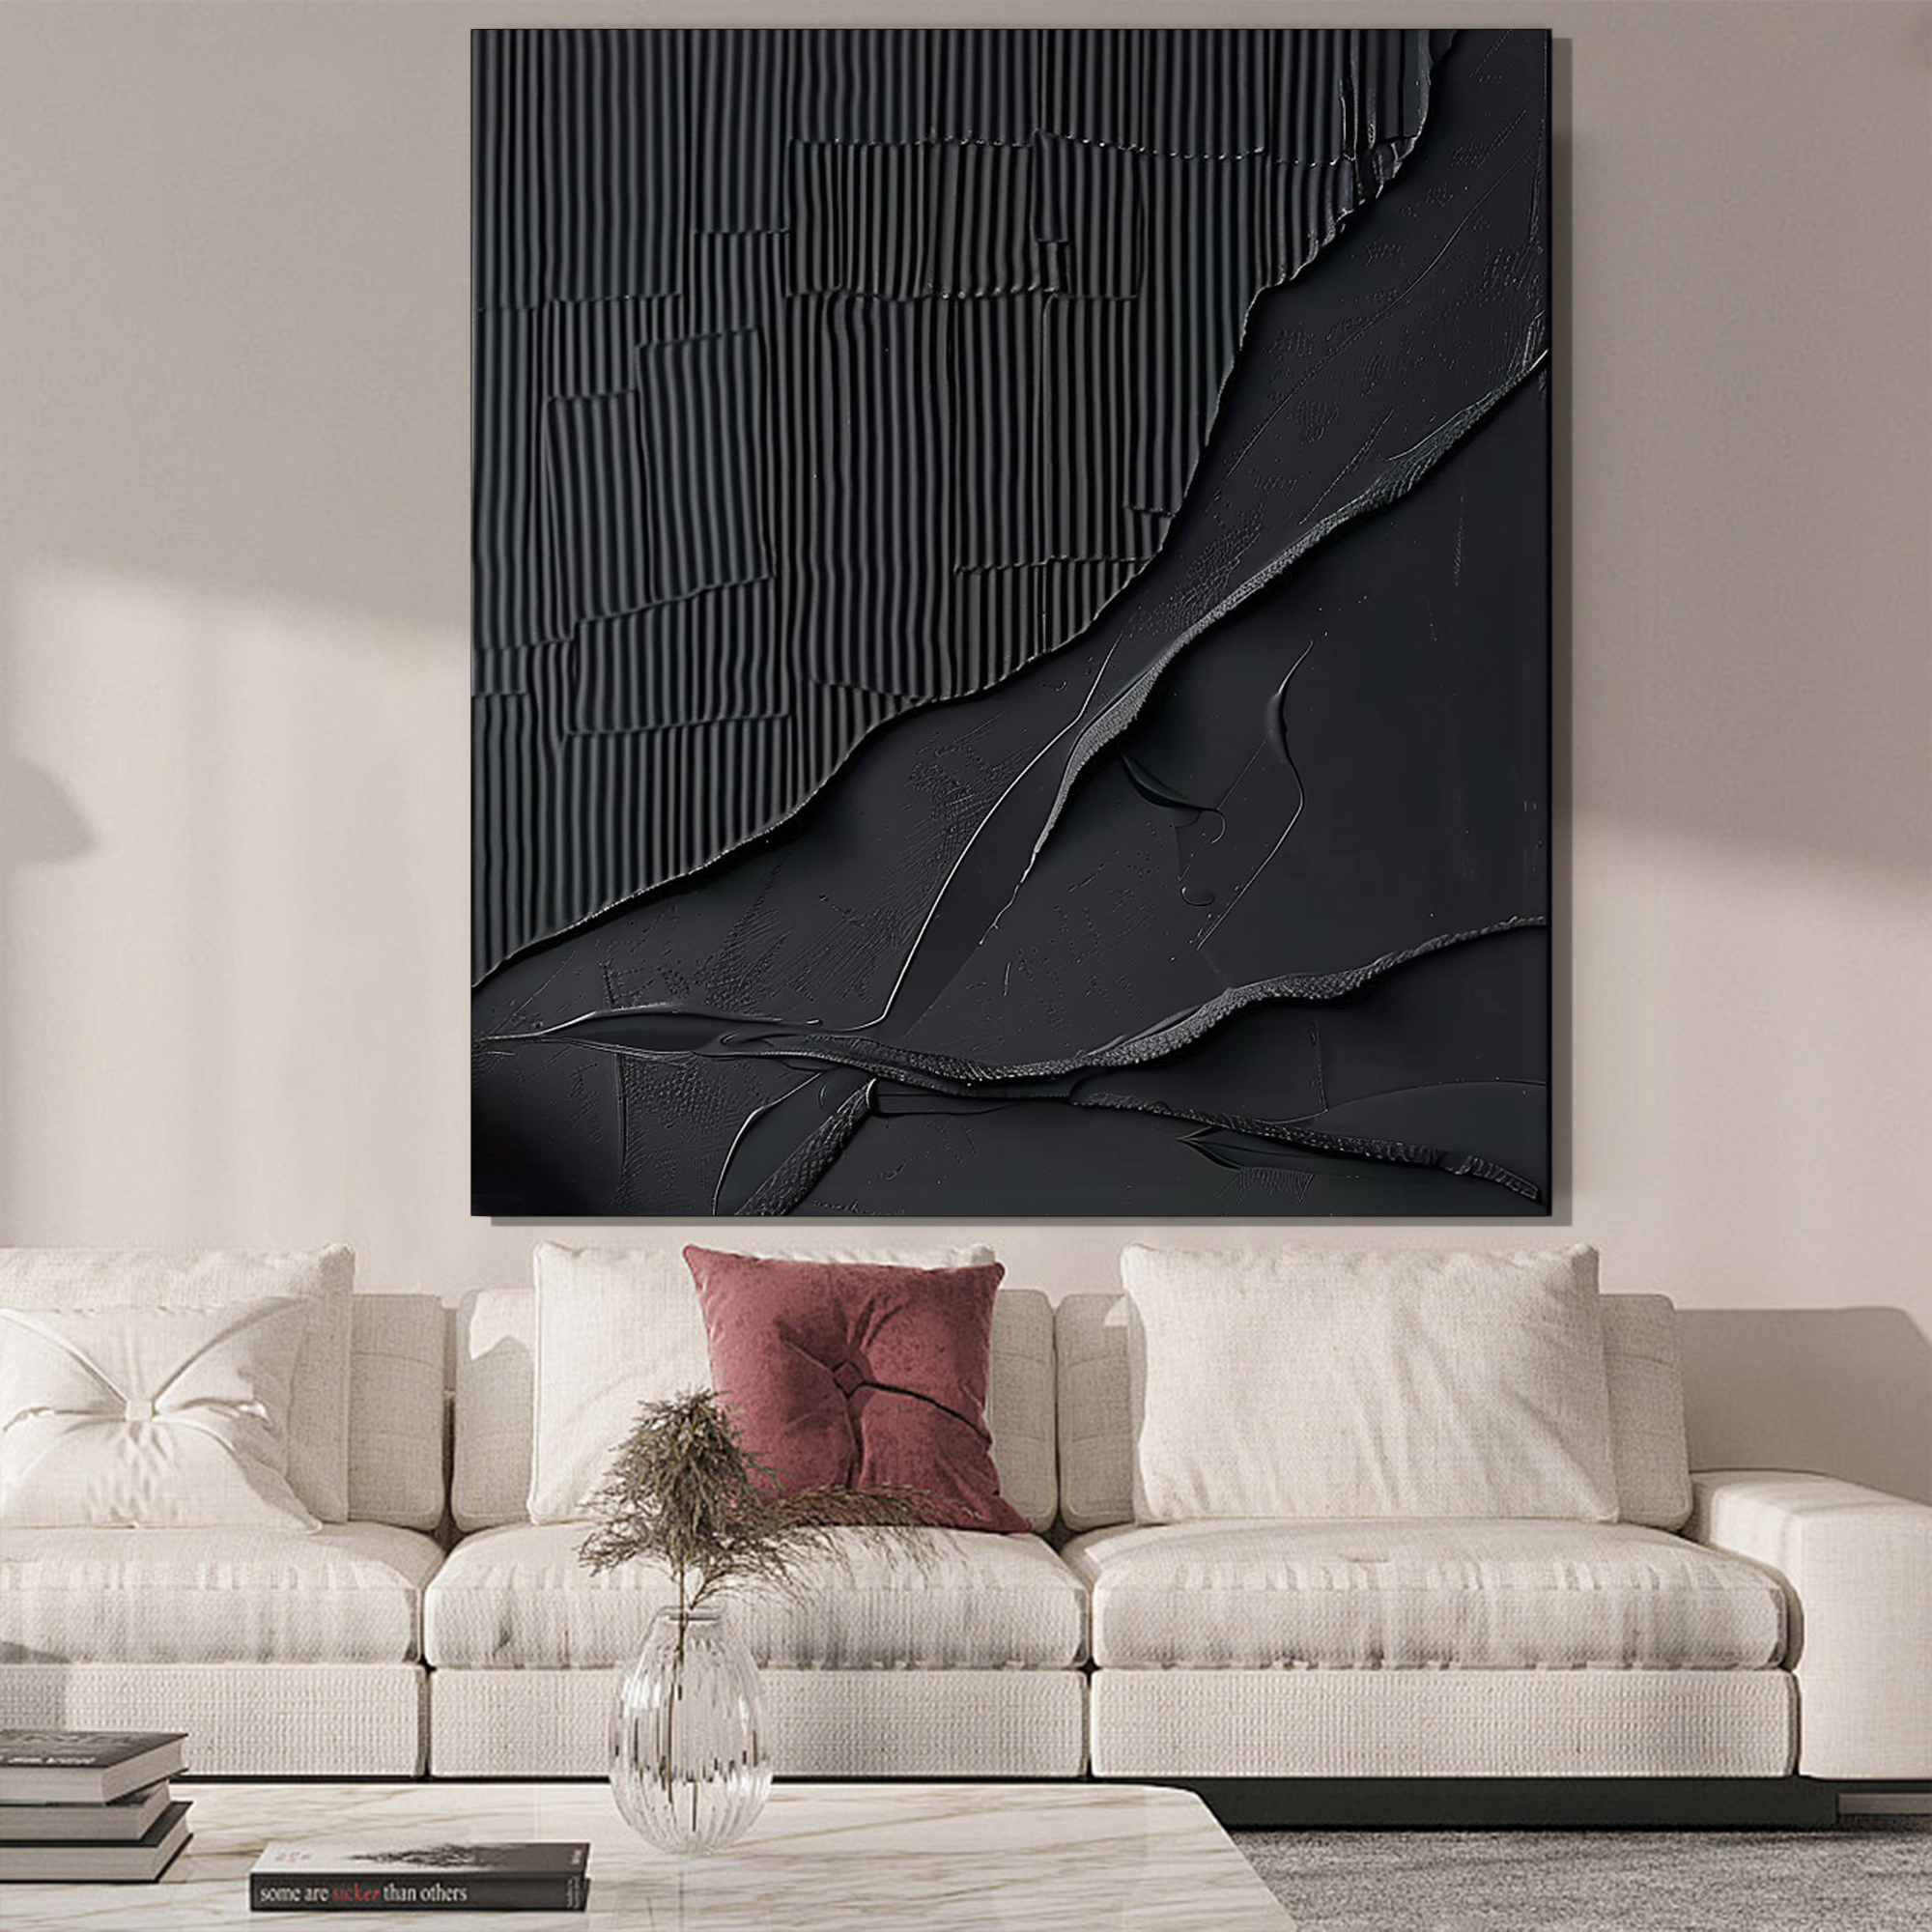 Minimalist Abstract Art Modern Painting "Contours of the Heart"